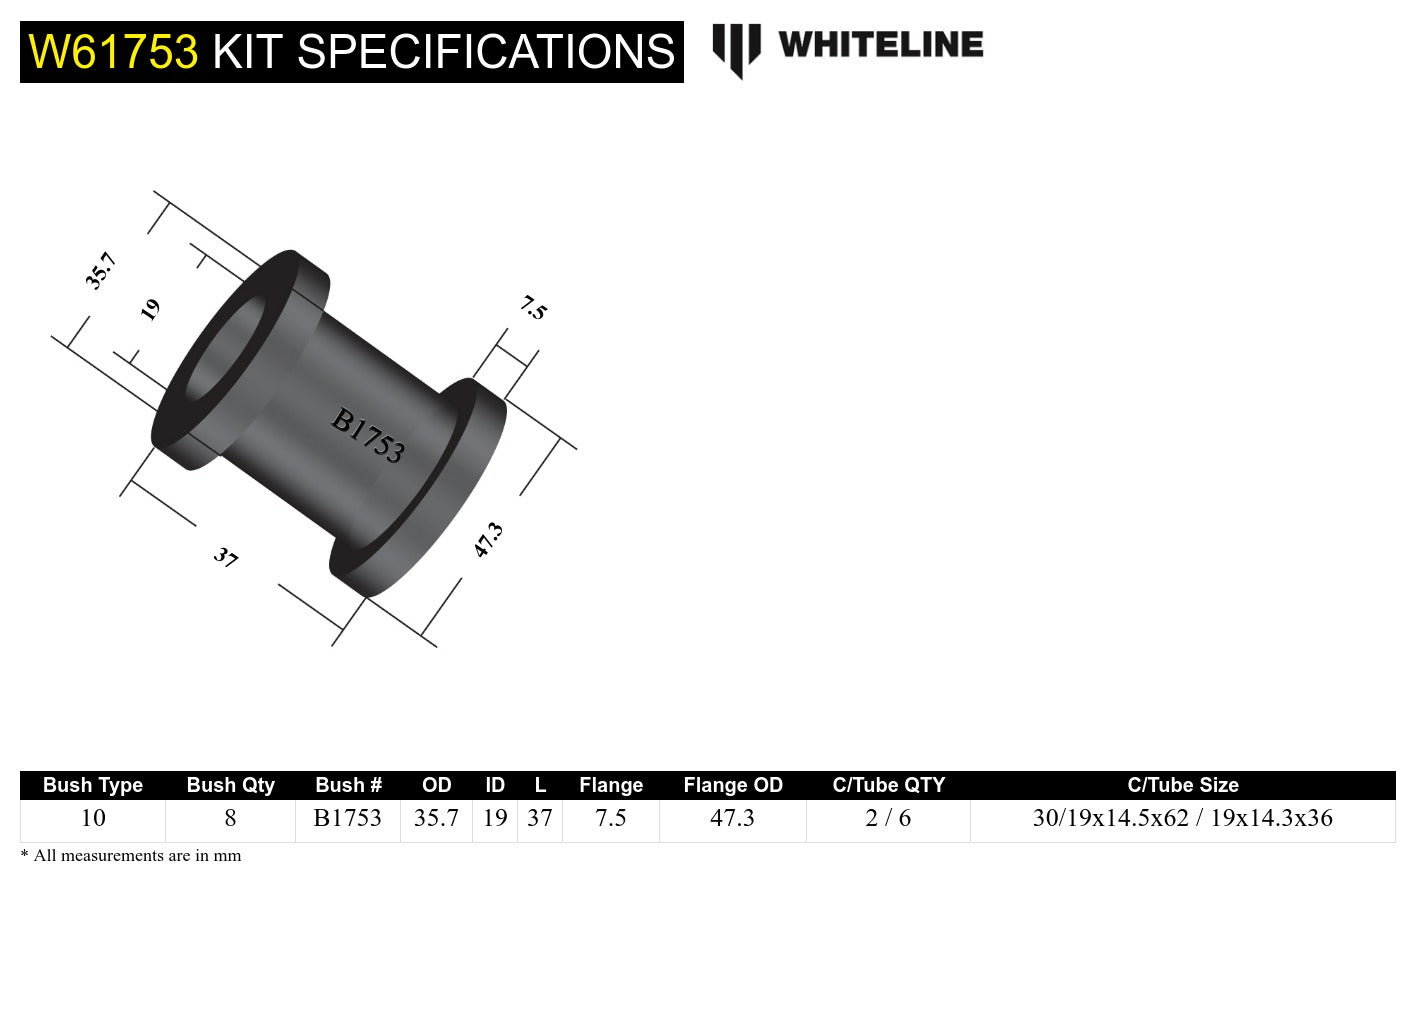 Rear Control arm - inner and outer bushing